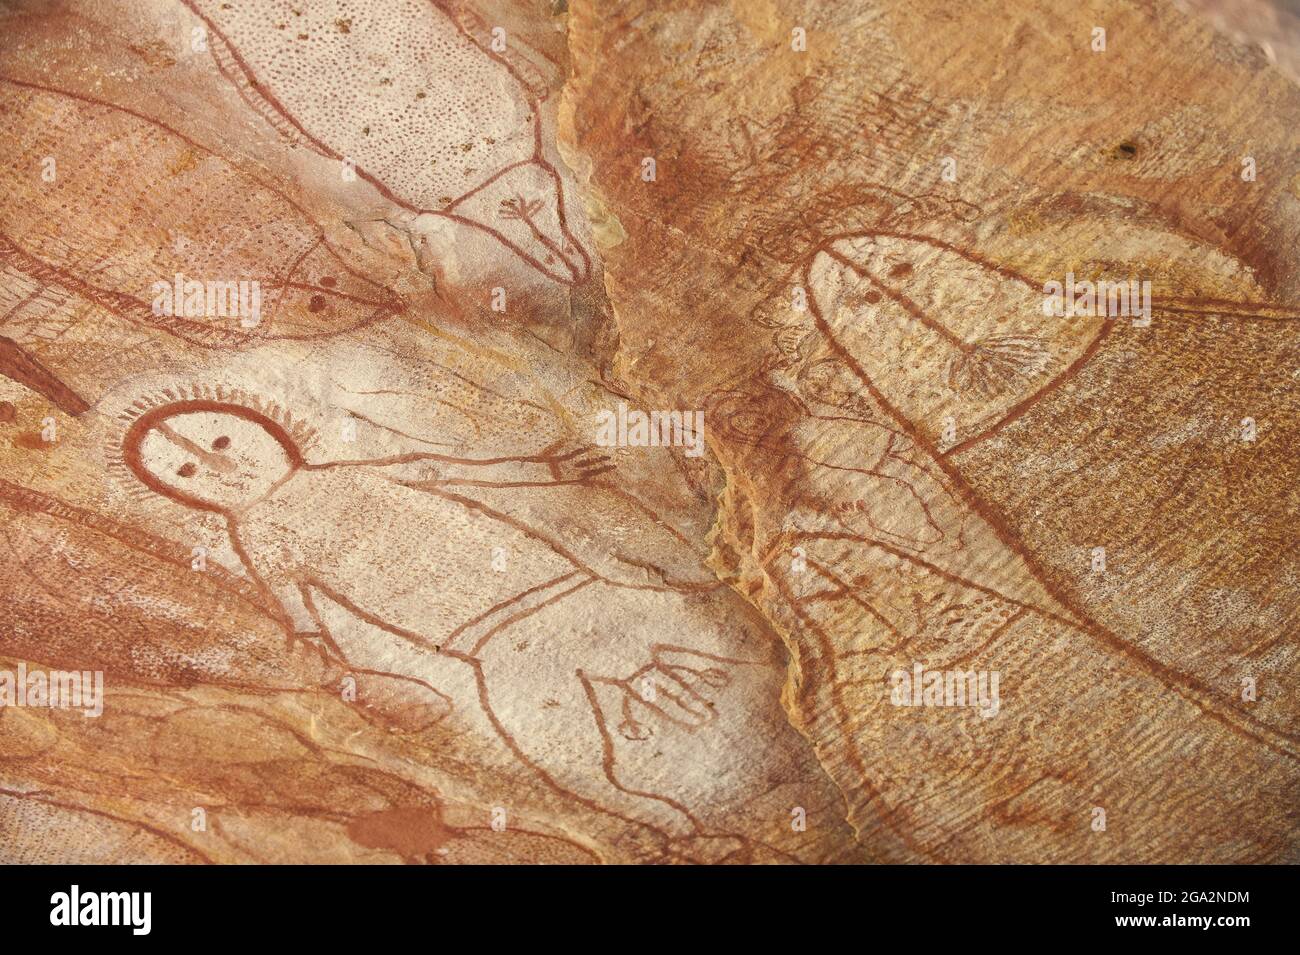 Close-up of Wandjina Aboriginal rock paintings on the sandstone walls in a cave at Raft Point; Western Australia, Australia Stock Photo